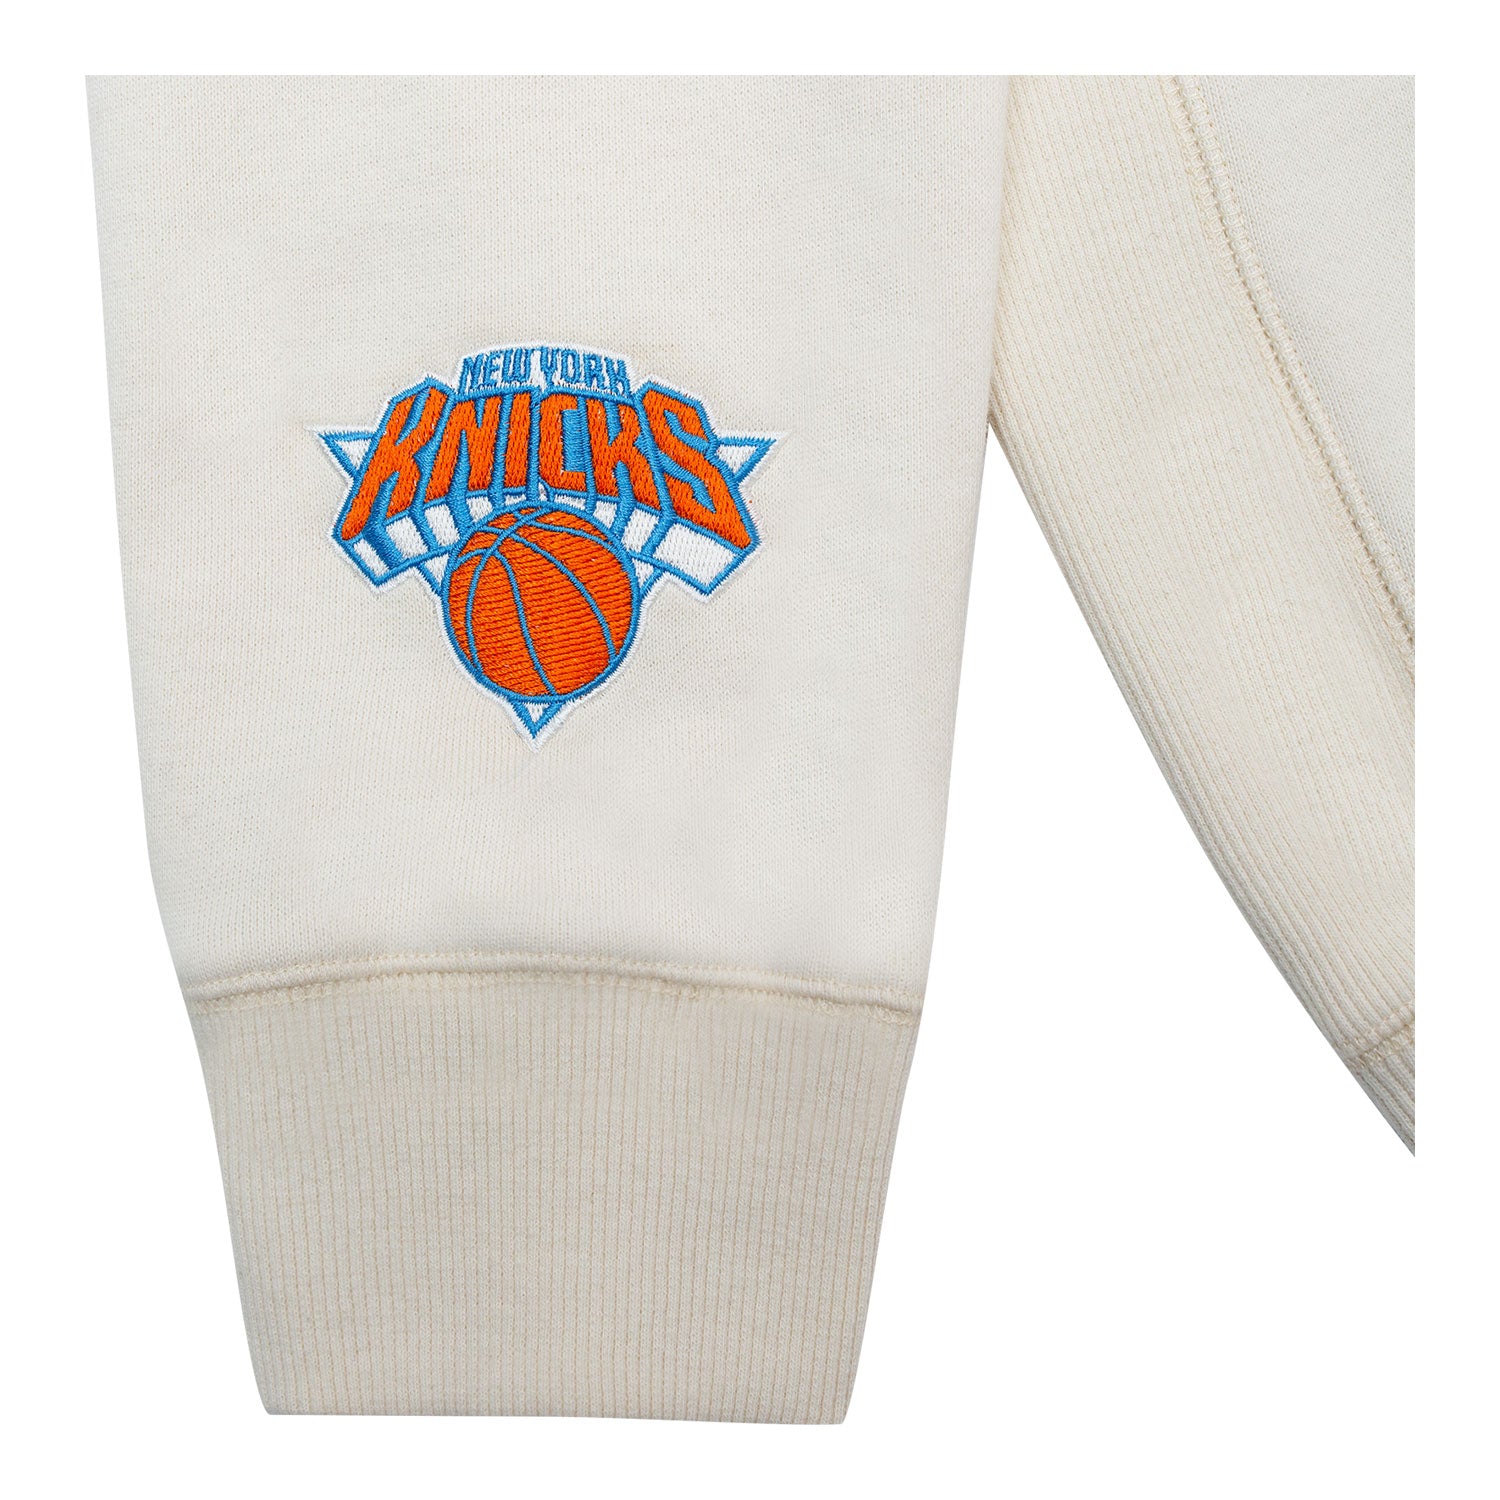 NYON x Knicks "Heyday" Crewneck - In White - Close Up Sleeve View